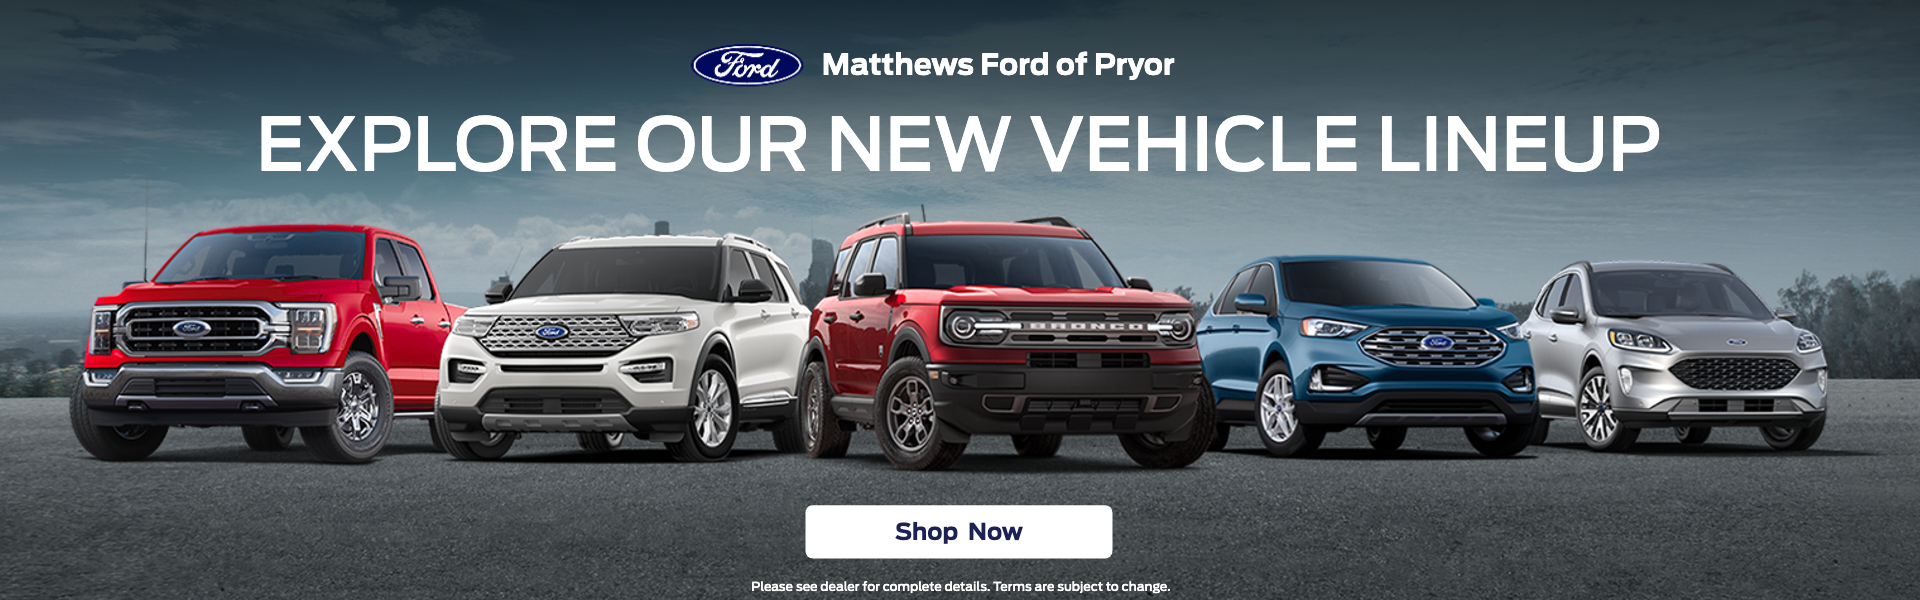 Explore our new vehicle lineup